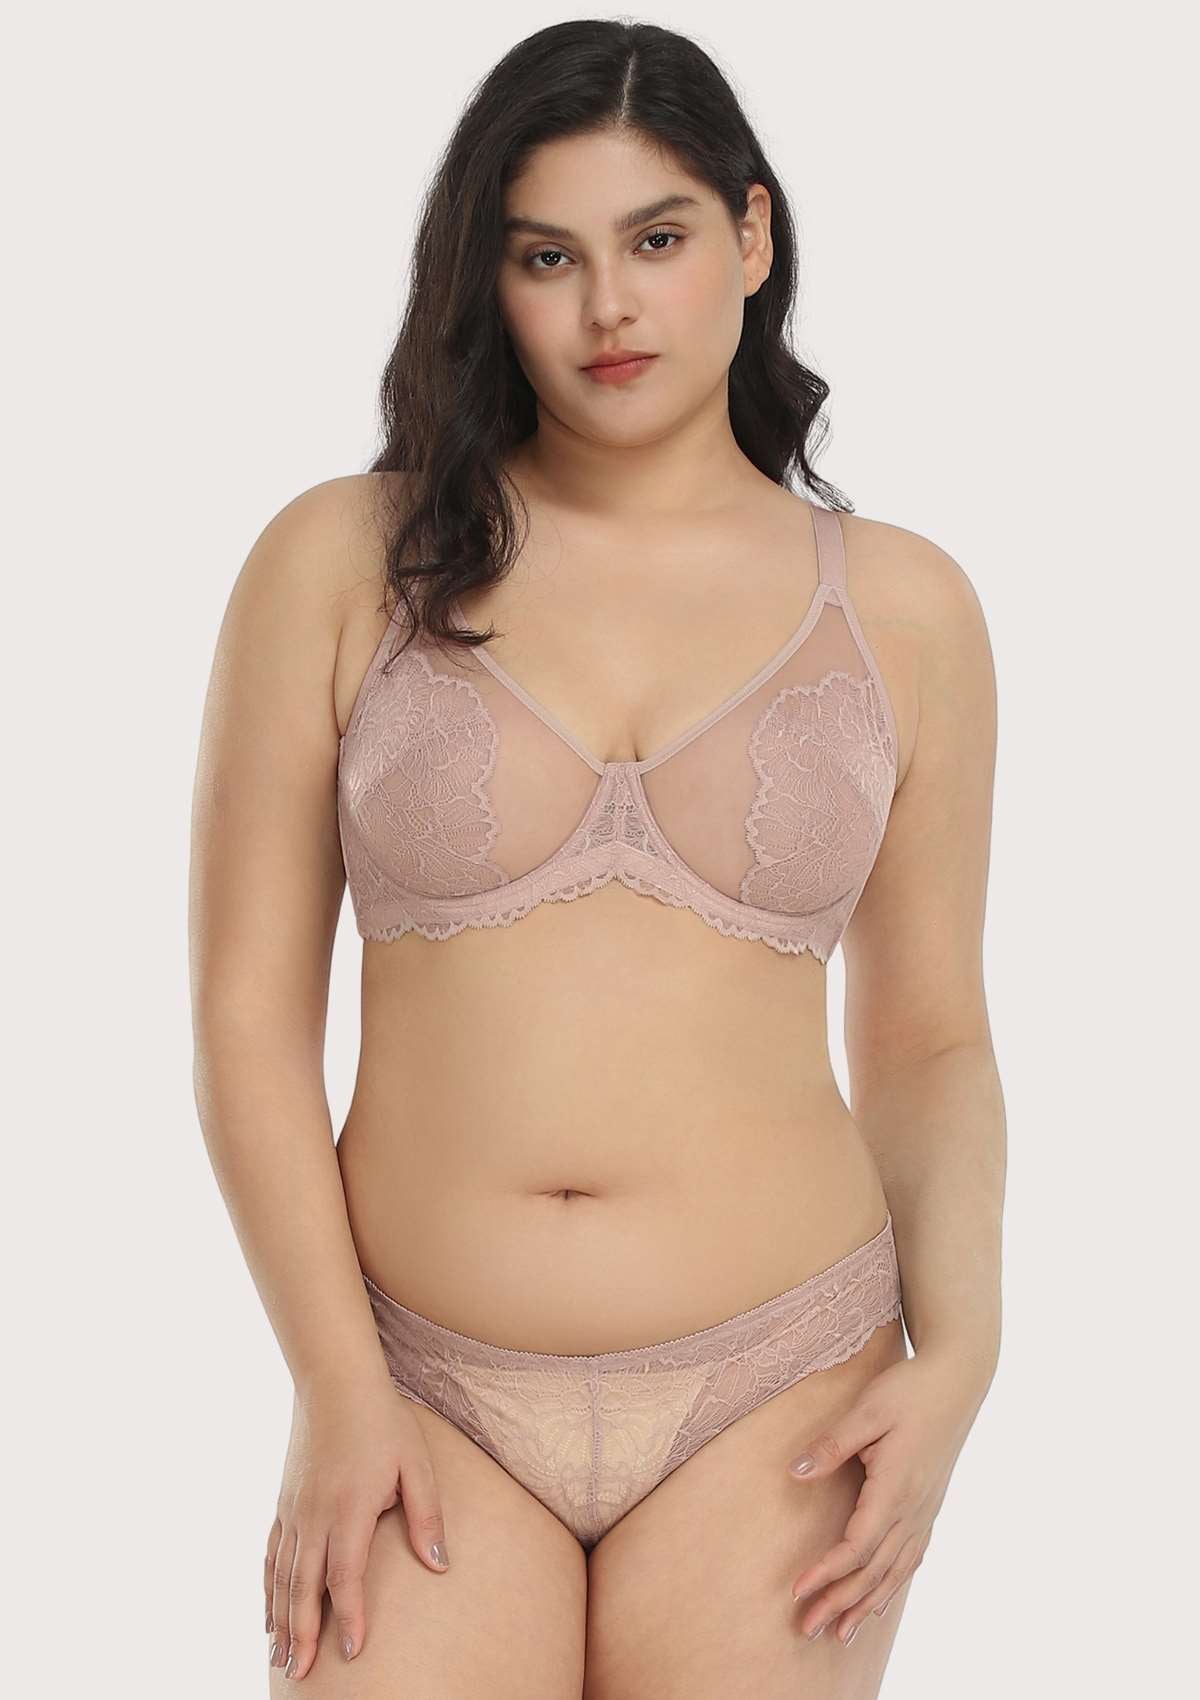 HSIA Blossom Lace Bra And Panties Set: Best Bra For Large Busts - Dark Pink / 40 / DD/E